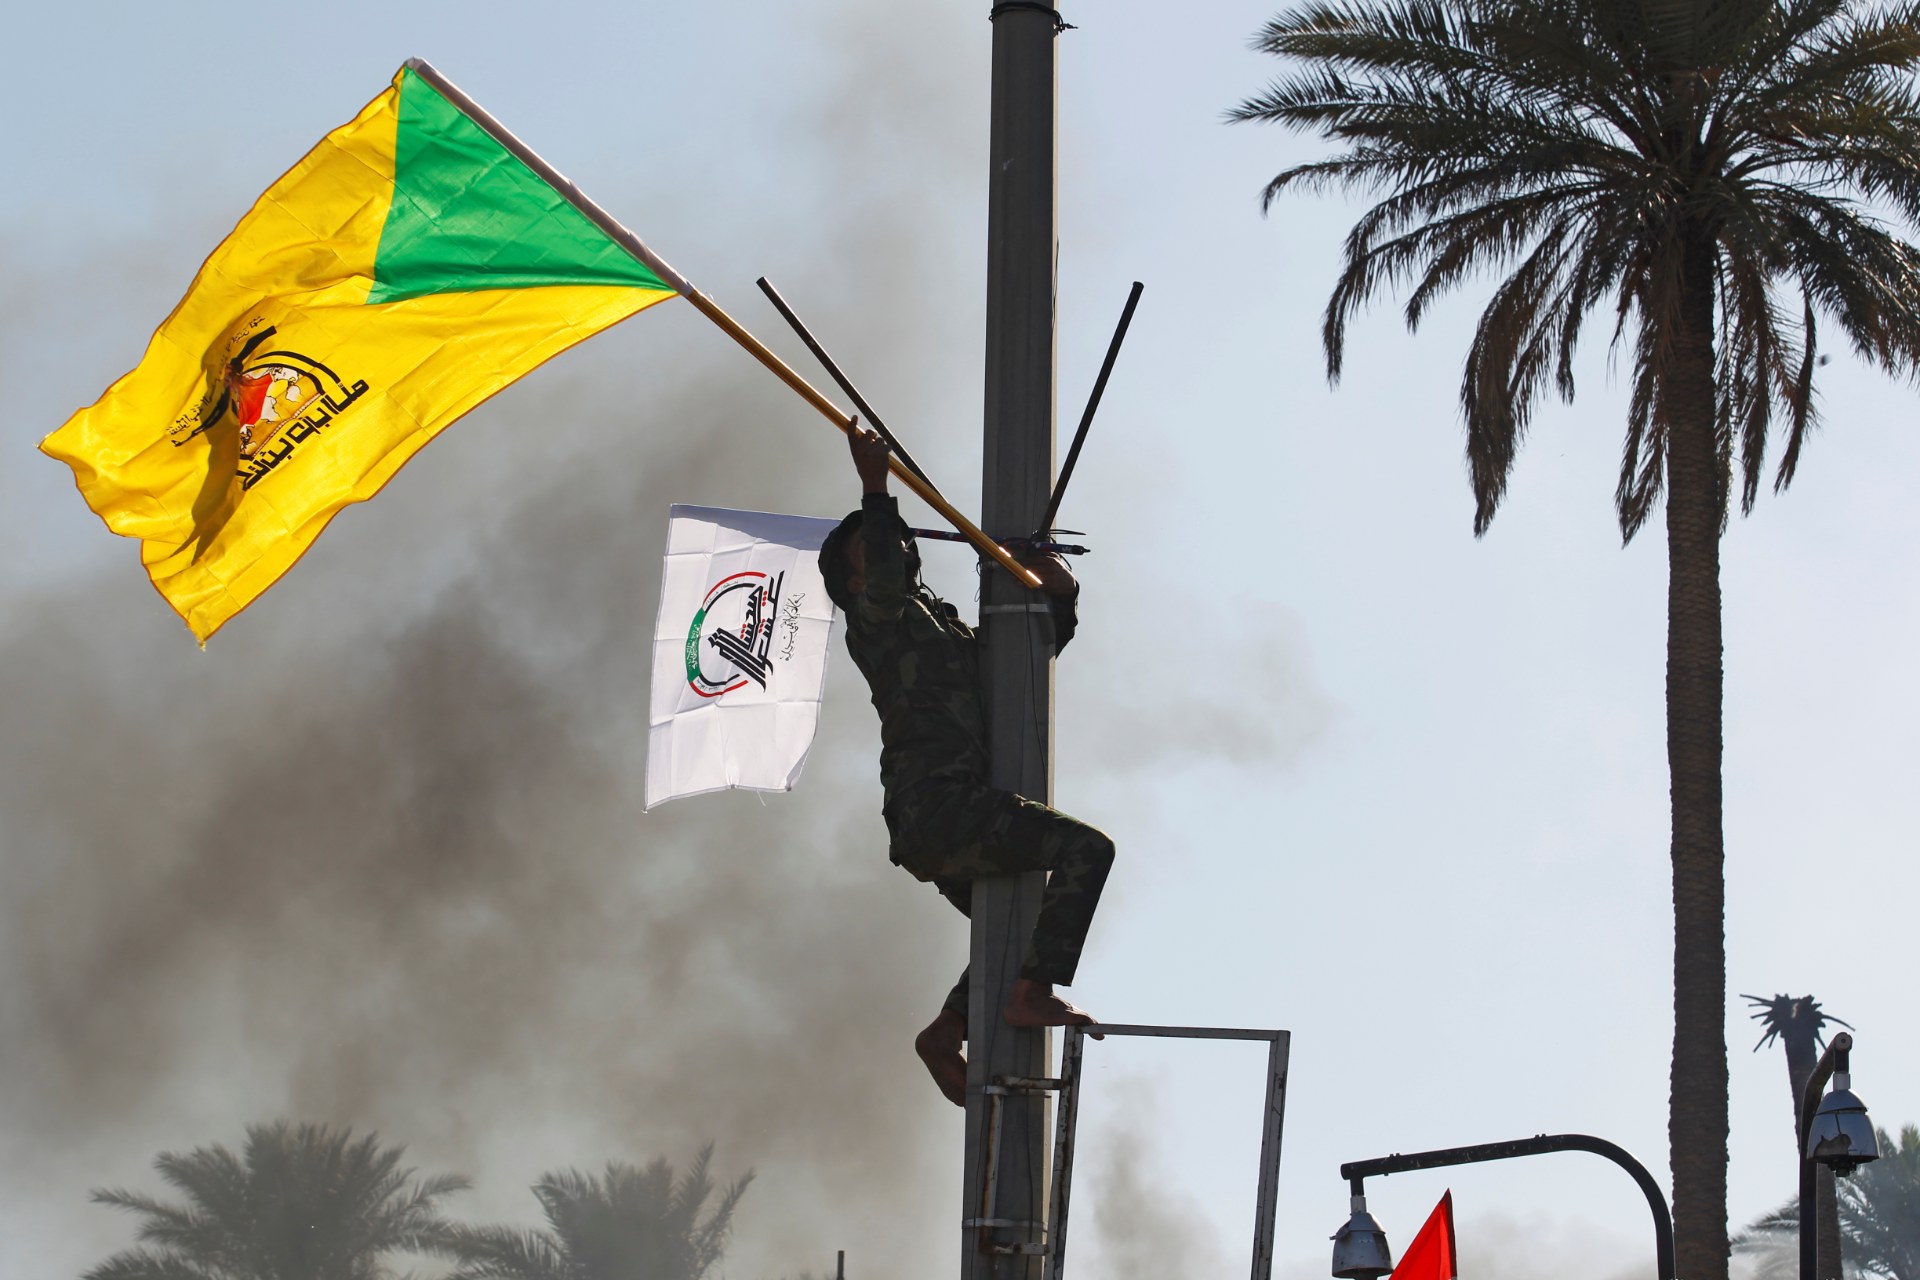 A member of Hashd al-Shaabi paramilitary forces holds a flag of Kataeb Hezbollah militia group during a protest to condemn air strikes on their bases, in Baghdad in December (Reuters)